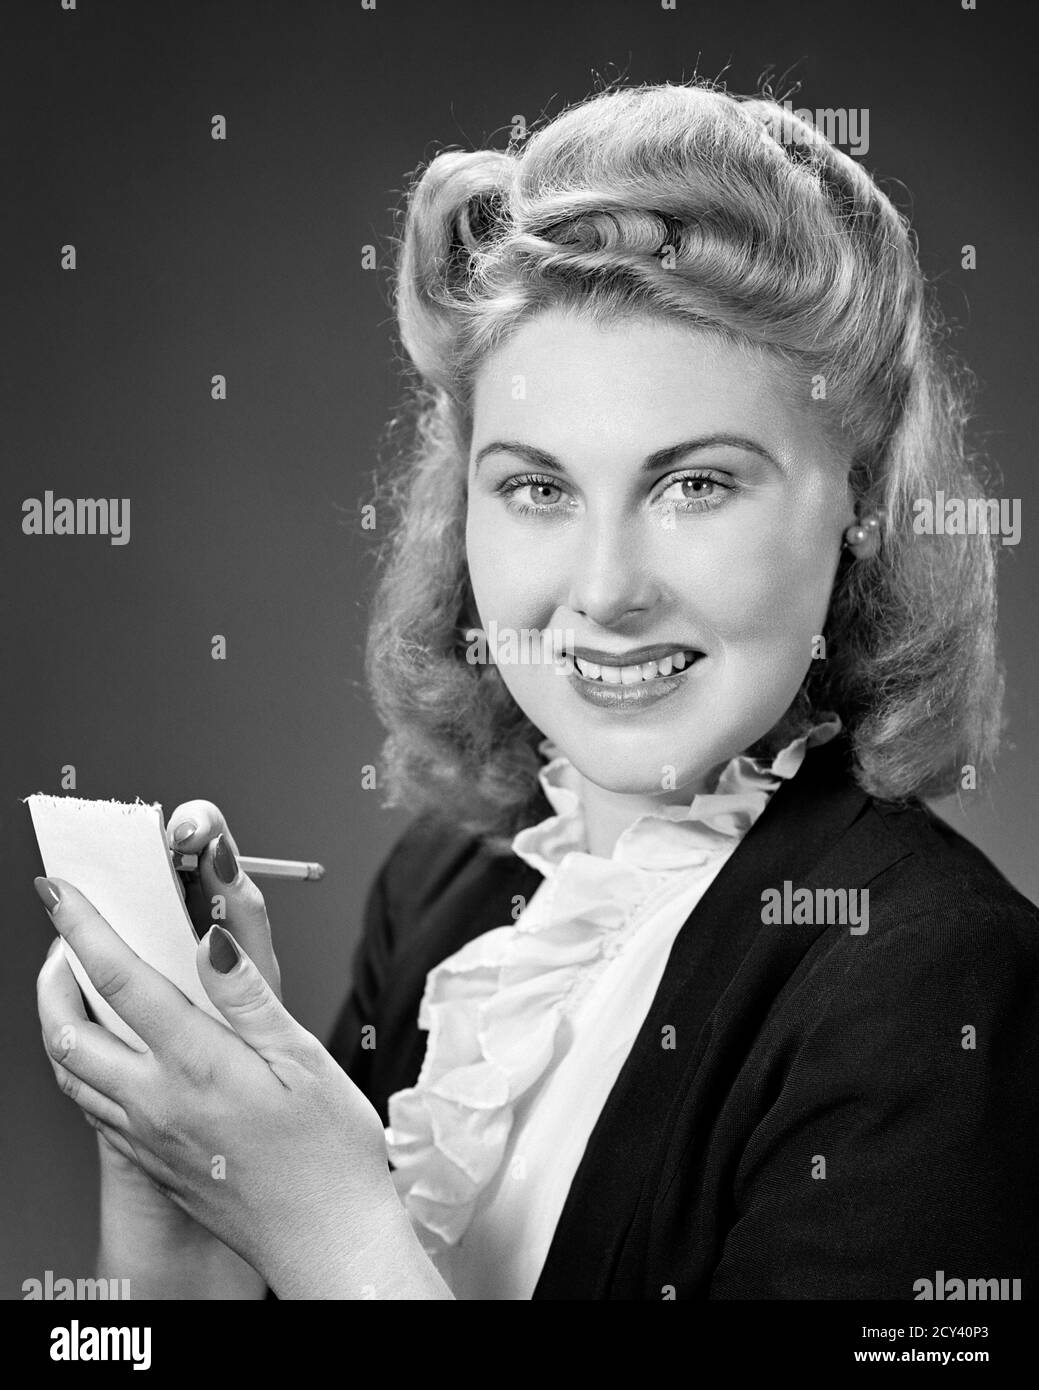 1940s SMILING BLOND WOMAN WITH VERY BIG VICTORY ROLLS HAIR STYLE RUFFLE  SHIRT LOOKING AT CAMERA WRITING ON NOTEPAD WITH PENCIL - g25 HAR001 HARS  FEMALES WINNING COPY SPACE LADIES PERSONS RECORDING